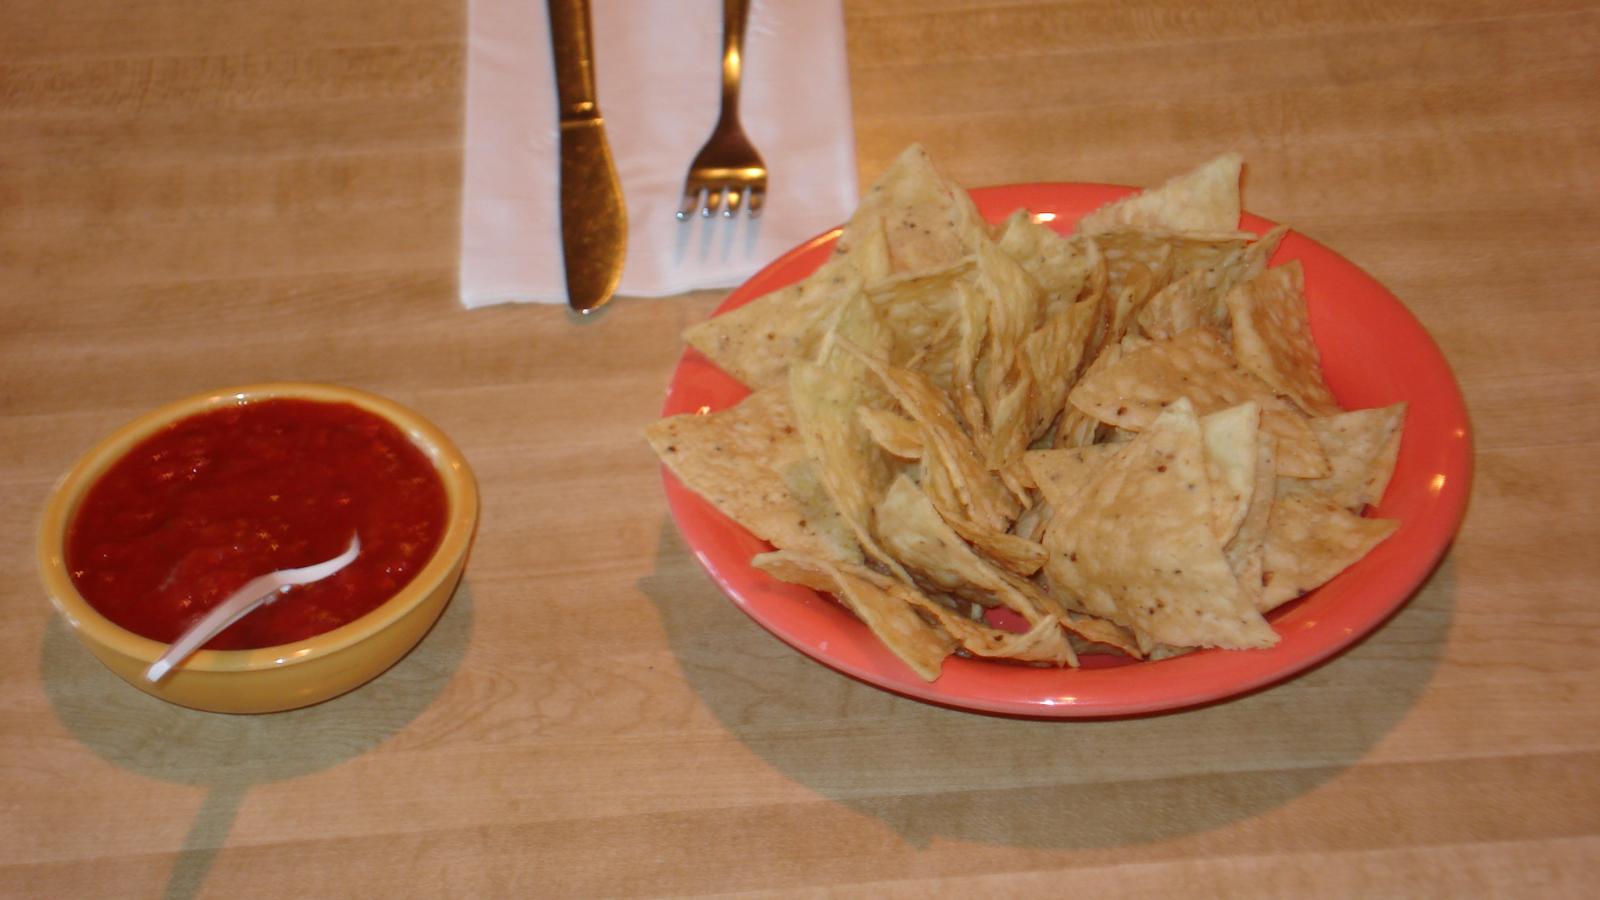 Marcelita's Authentic Mexican Food in Summit County, OH